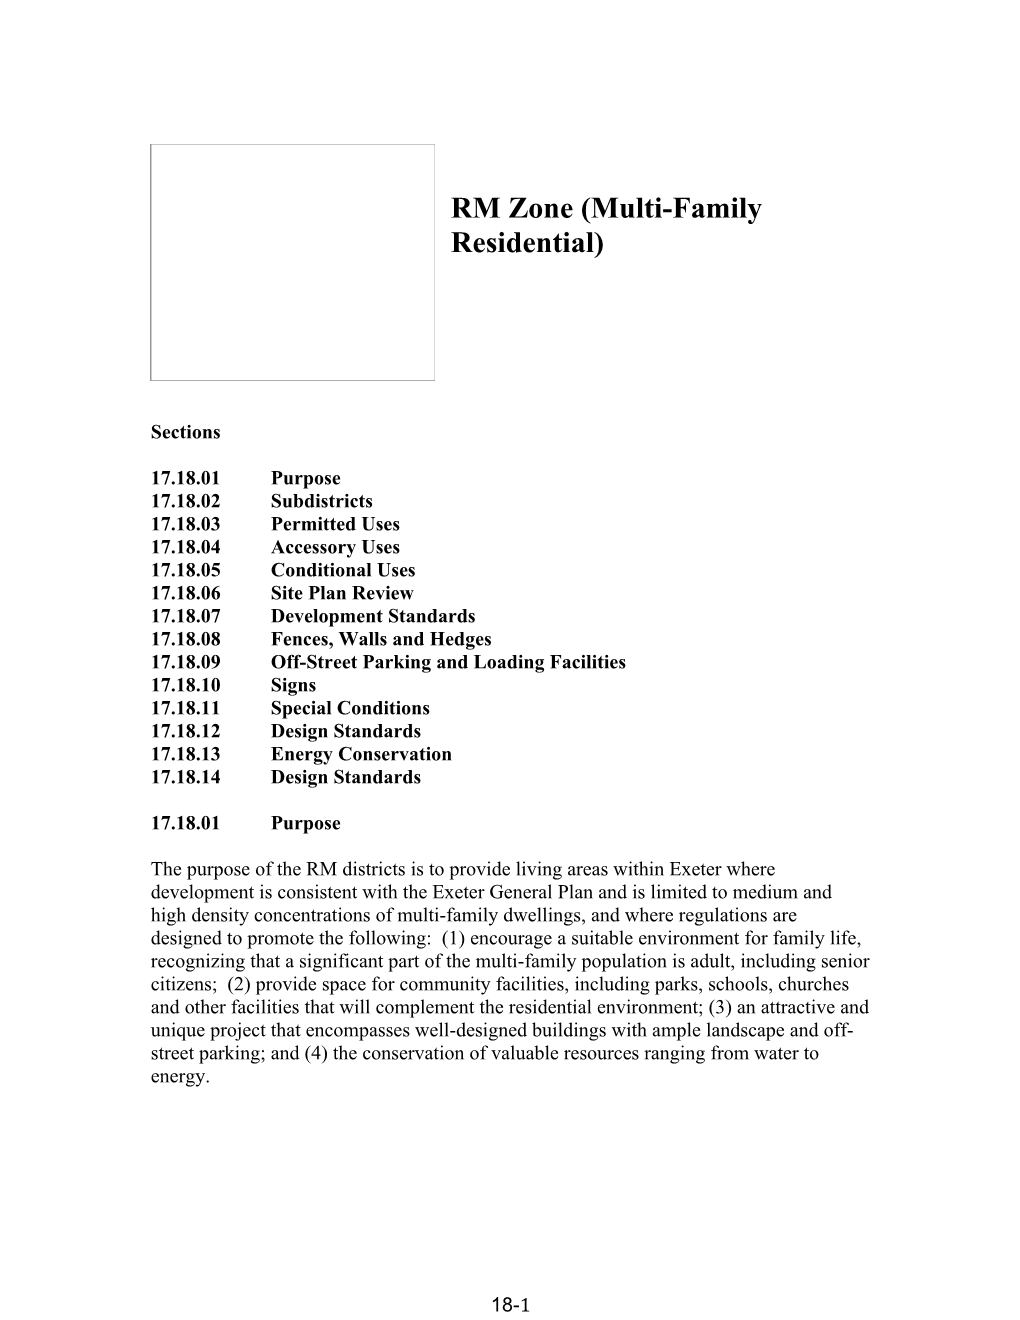 Chapter 18: RM Zone (Multiple Family Residential)